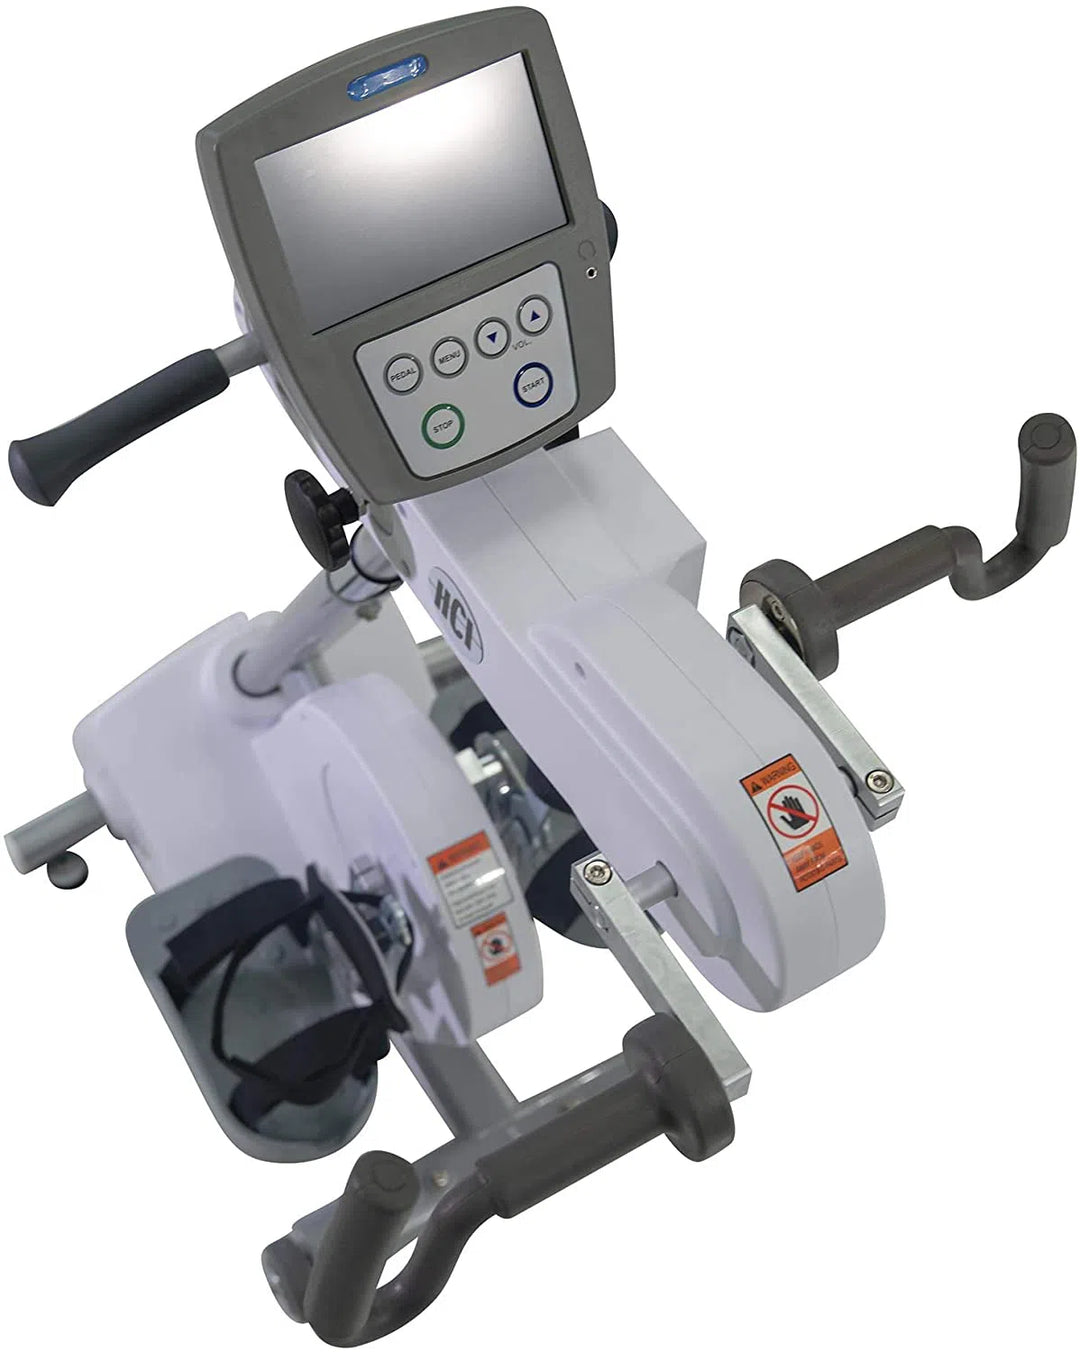 HCI OmniTrainer Physical Therapy Hand Bike OT-1100 from the top angle